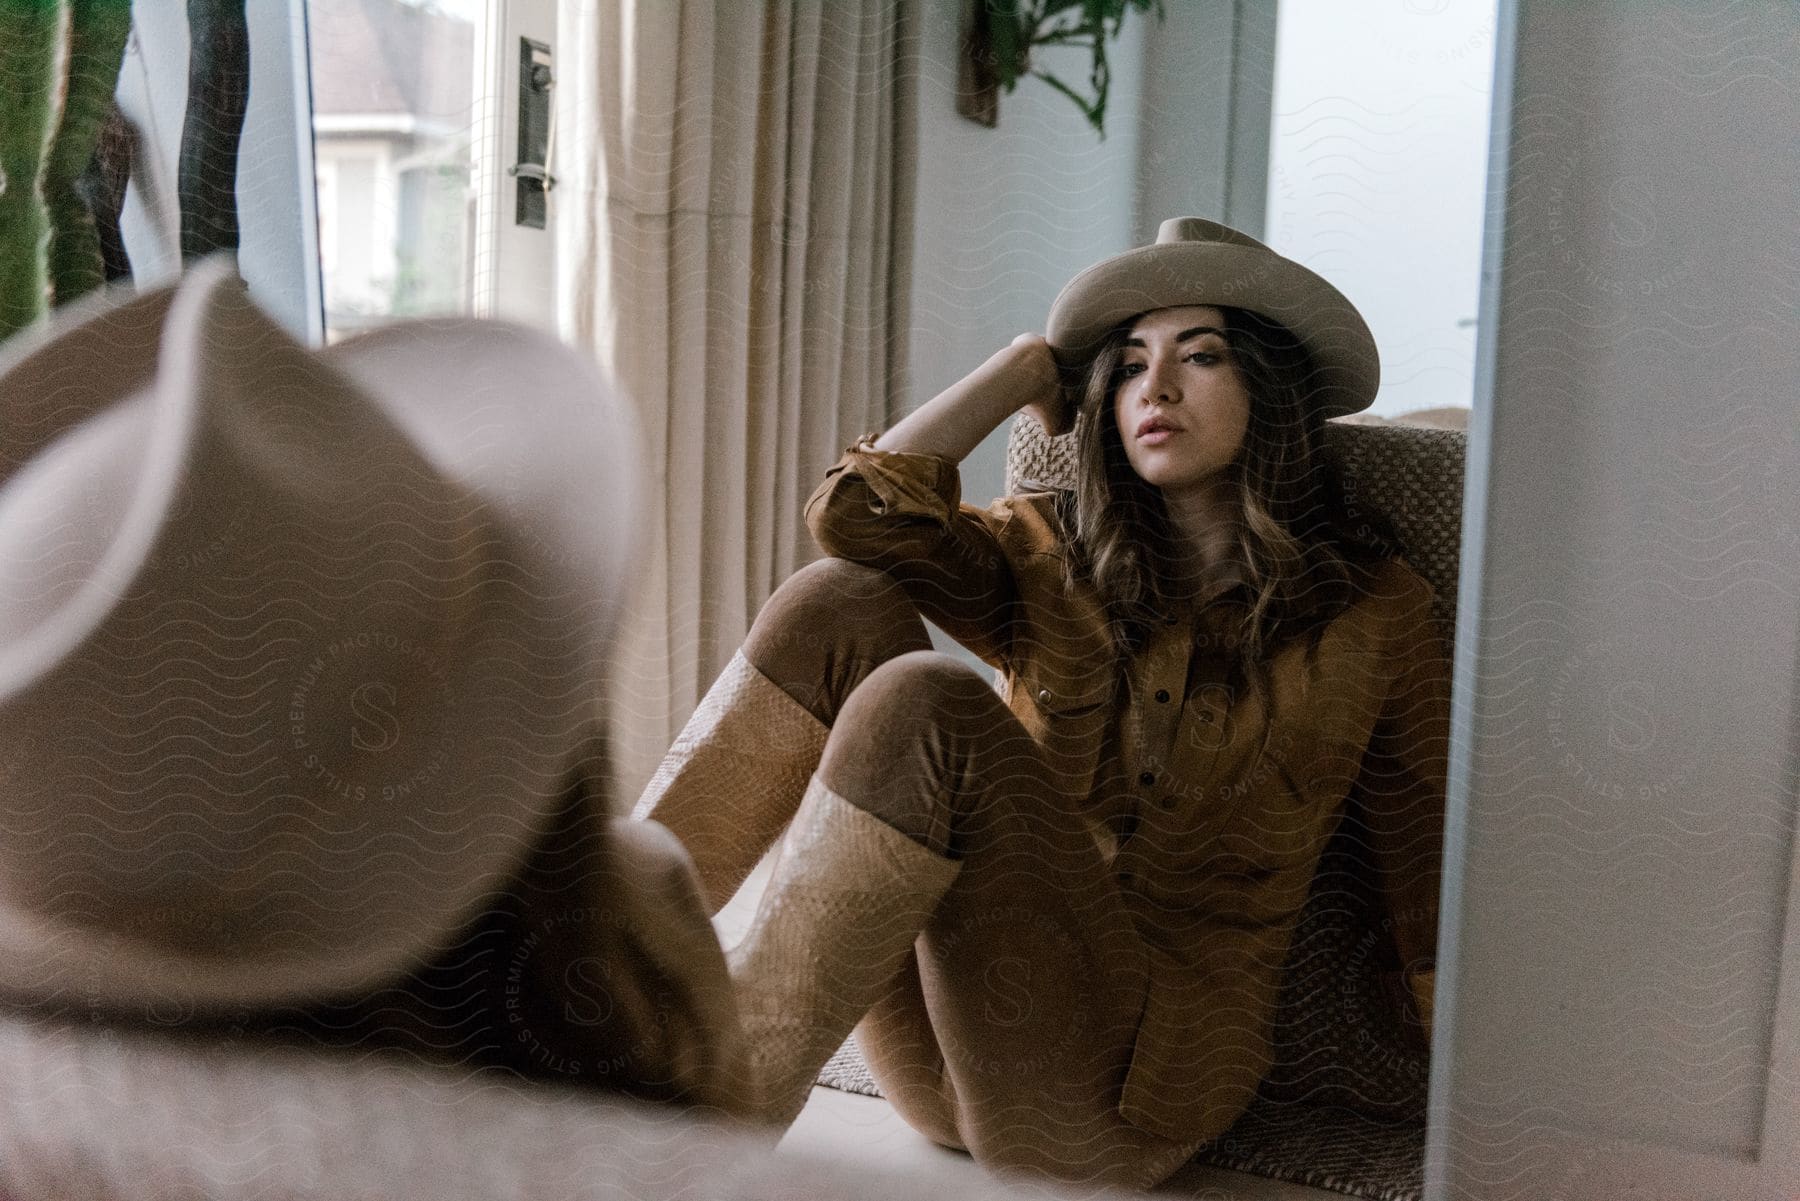 A person sitting in a southern apartment wearing a cowboy hat and fashionable clothing